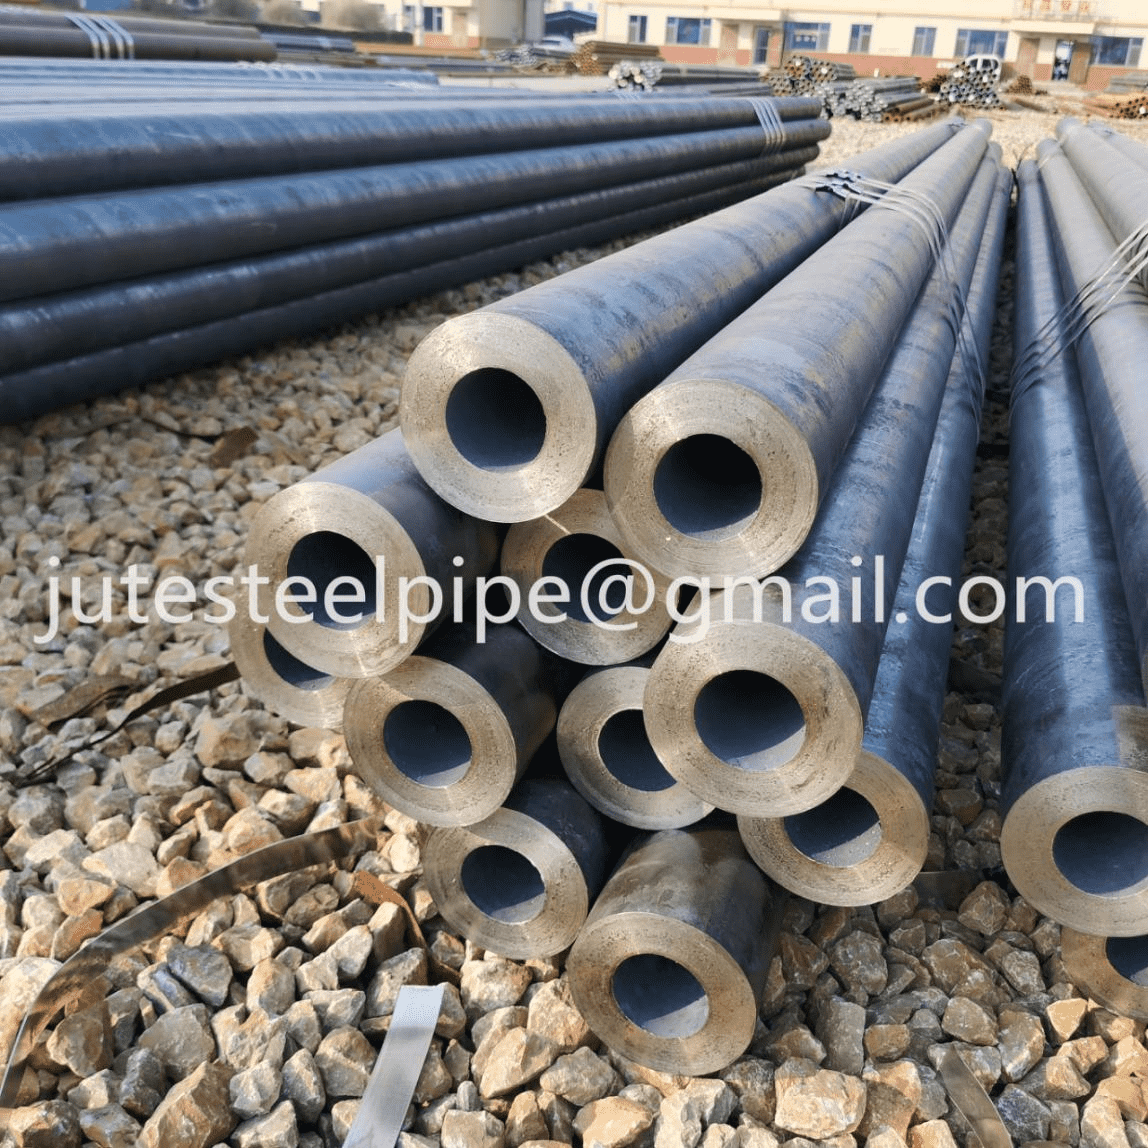 Summary of seamless steel pipe knowledge terms